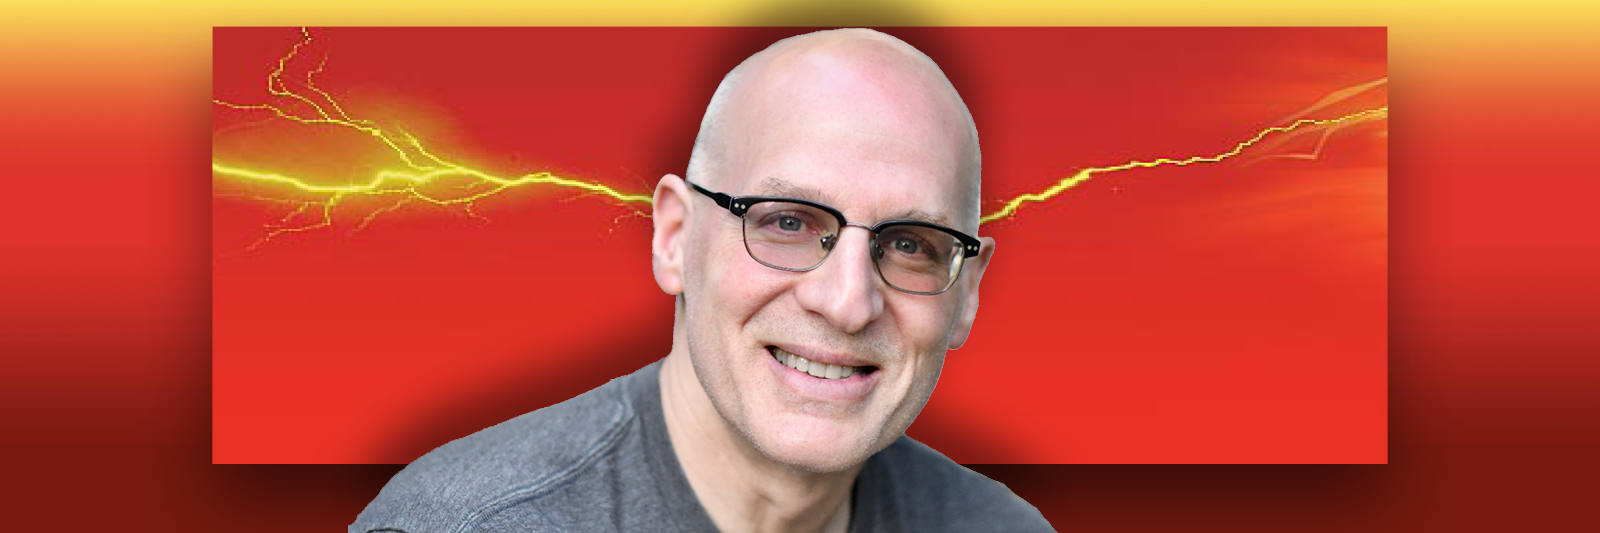 A picture of Gordon Korman with lightening behind his head. 